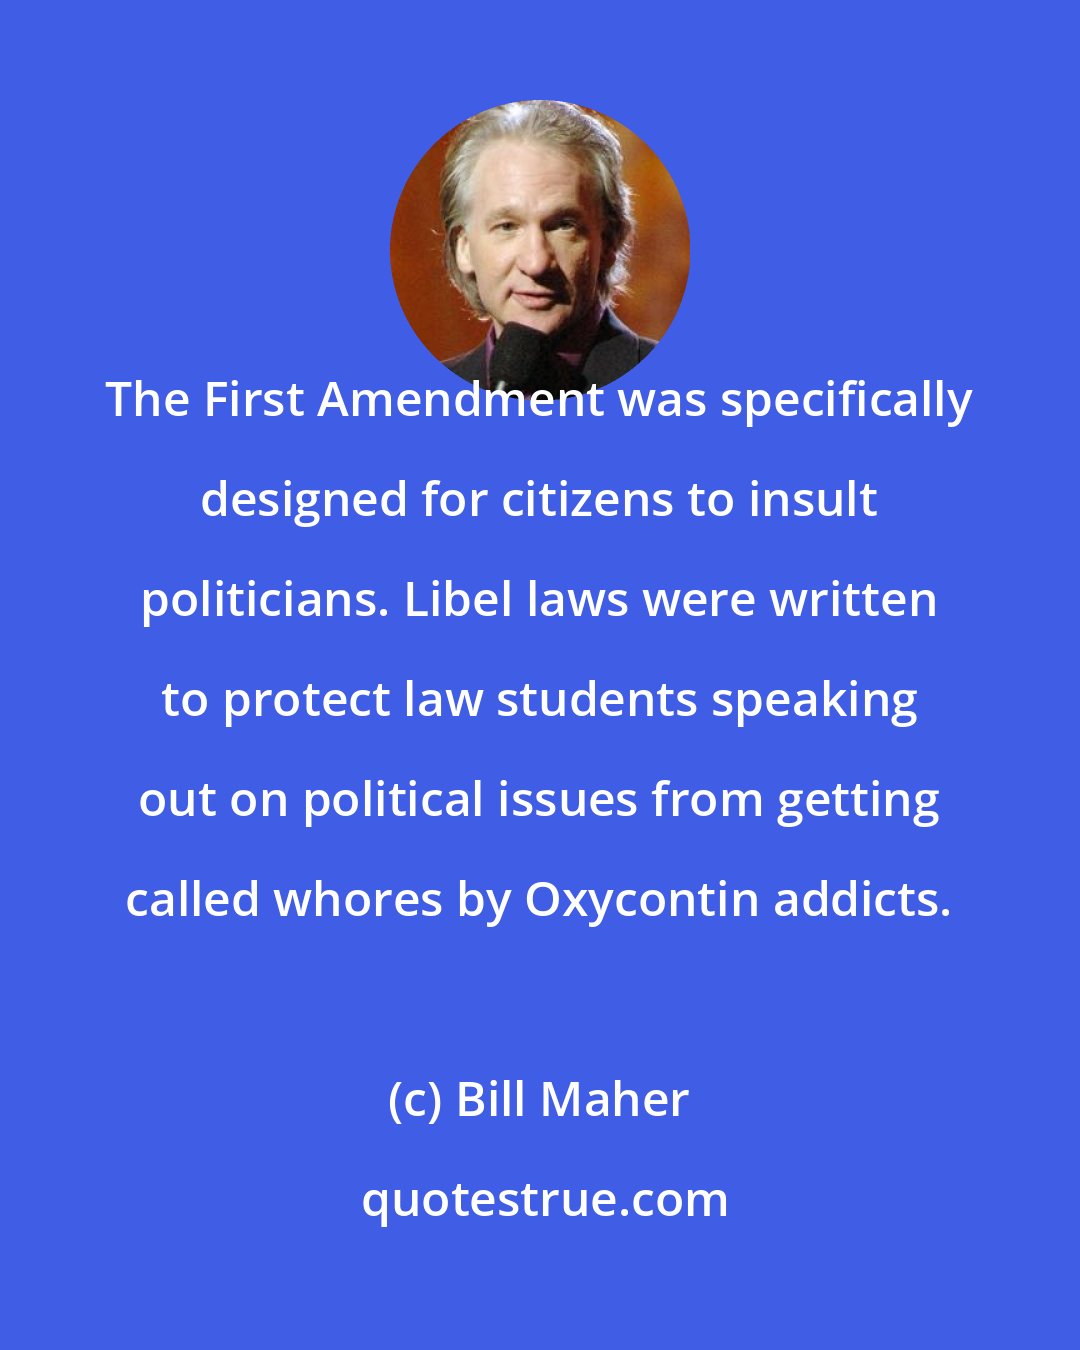 Bill Maher: The First Amendment was specifically designed for citizens to insult politicians. Libel laws were written to protect law students speaking out on political issues from getting called whores by Oxycontin addicts.